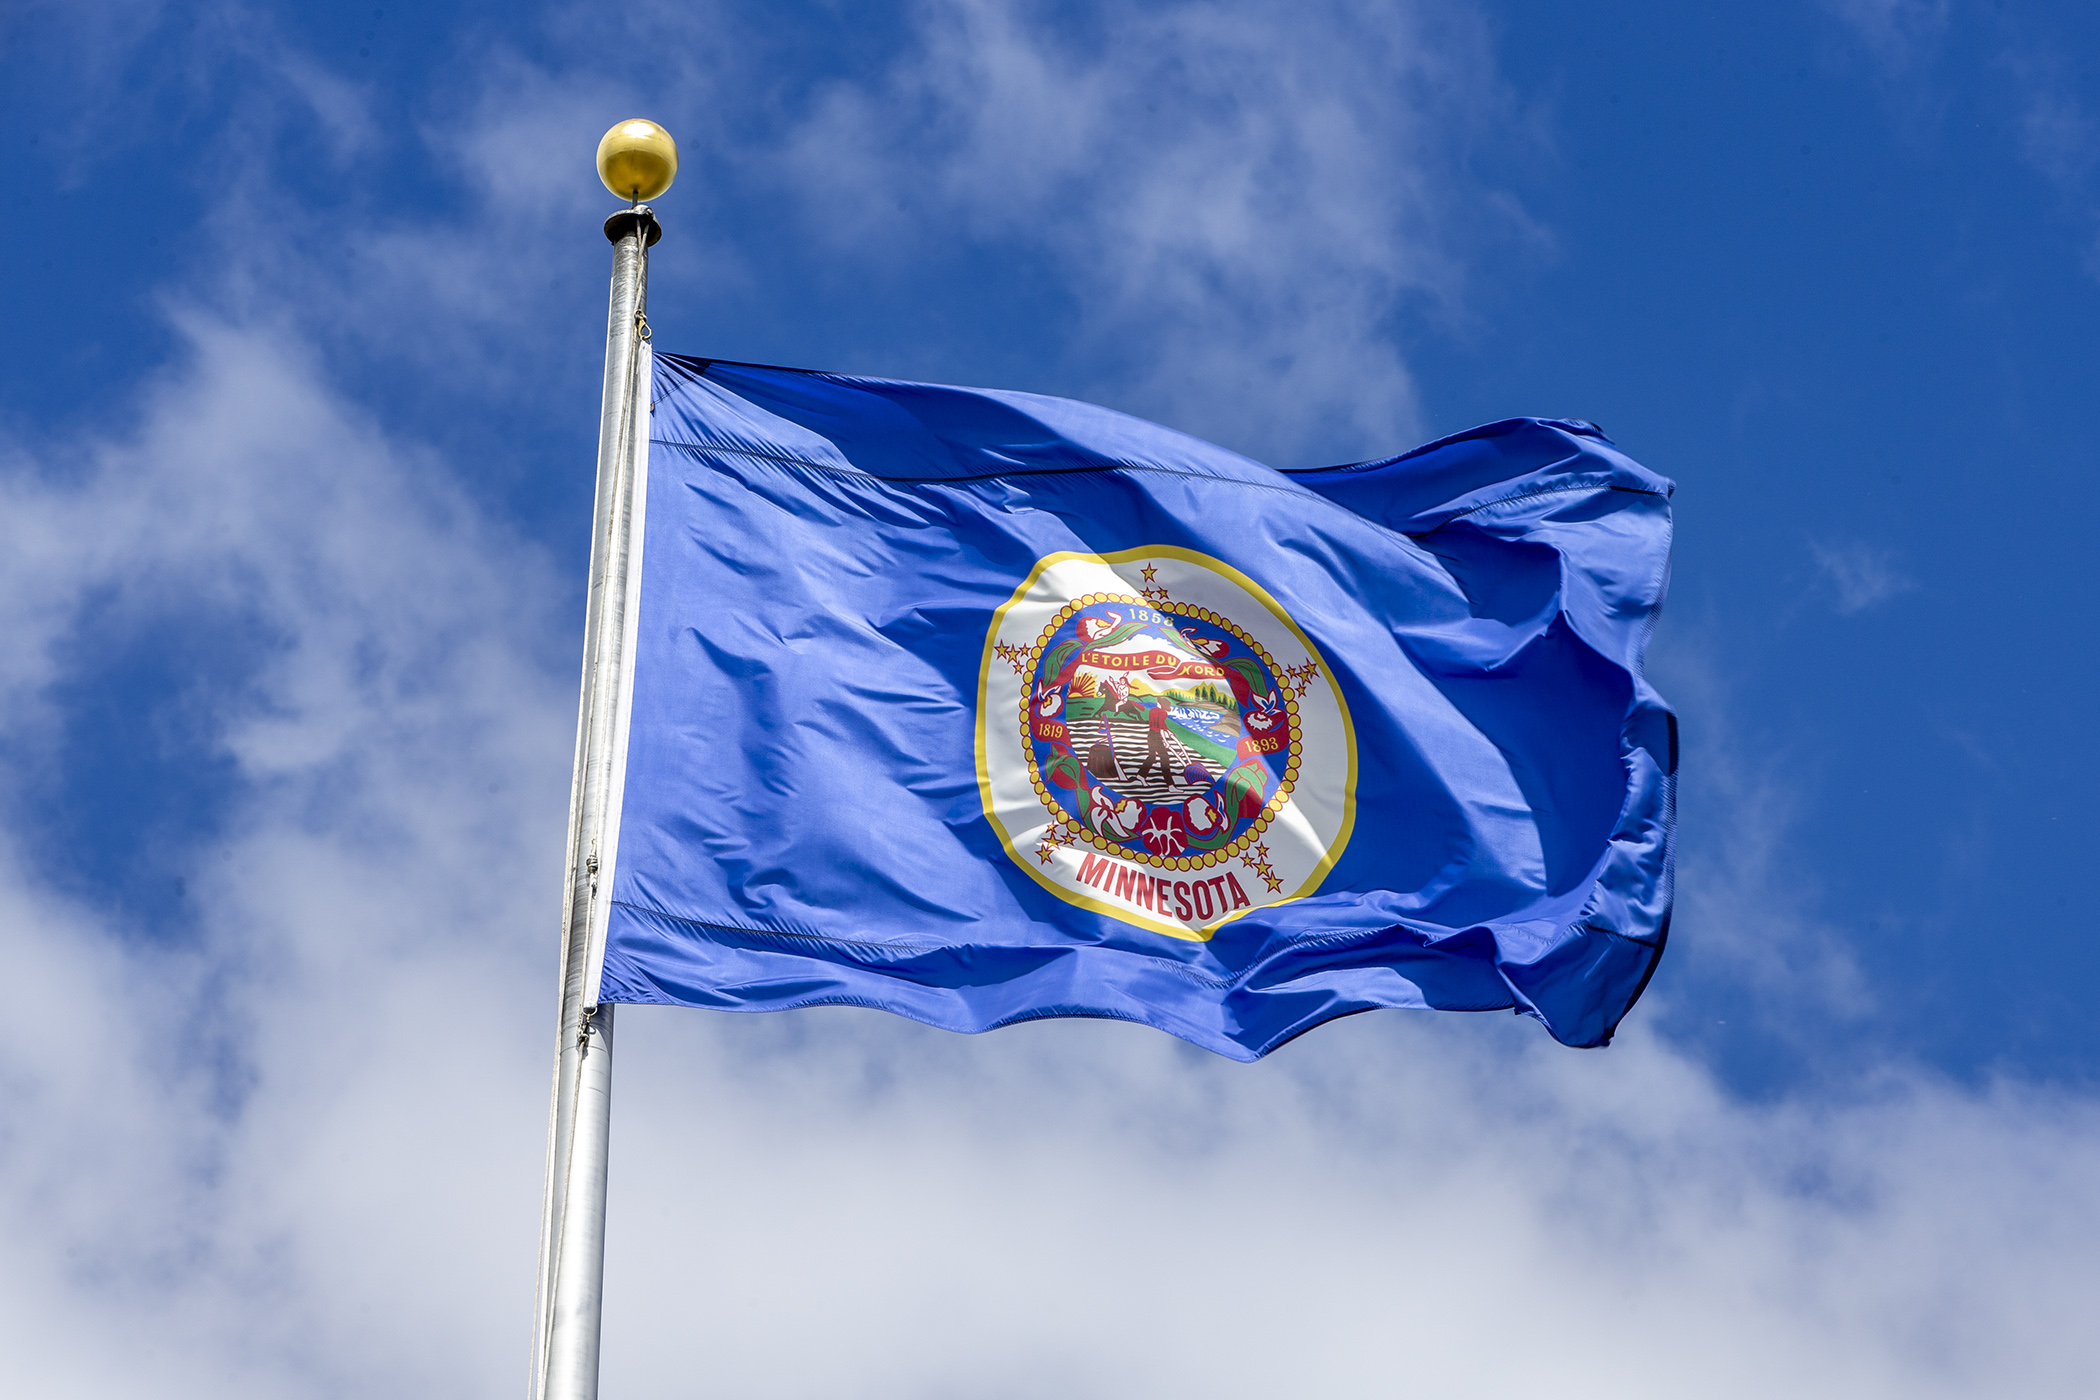 A provision included in HF4293, the omnibus state government and elections bill, would create a commission to recommend new designs to replace Minnesota's current state flag. (House Photography file photo)